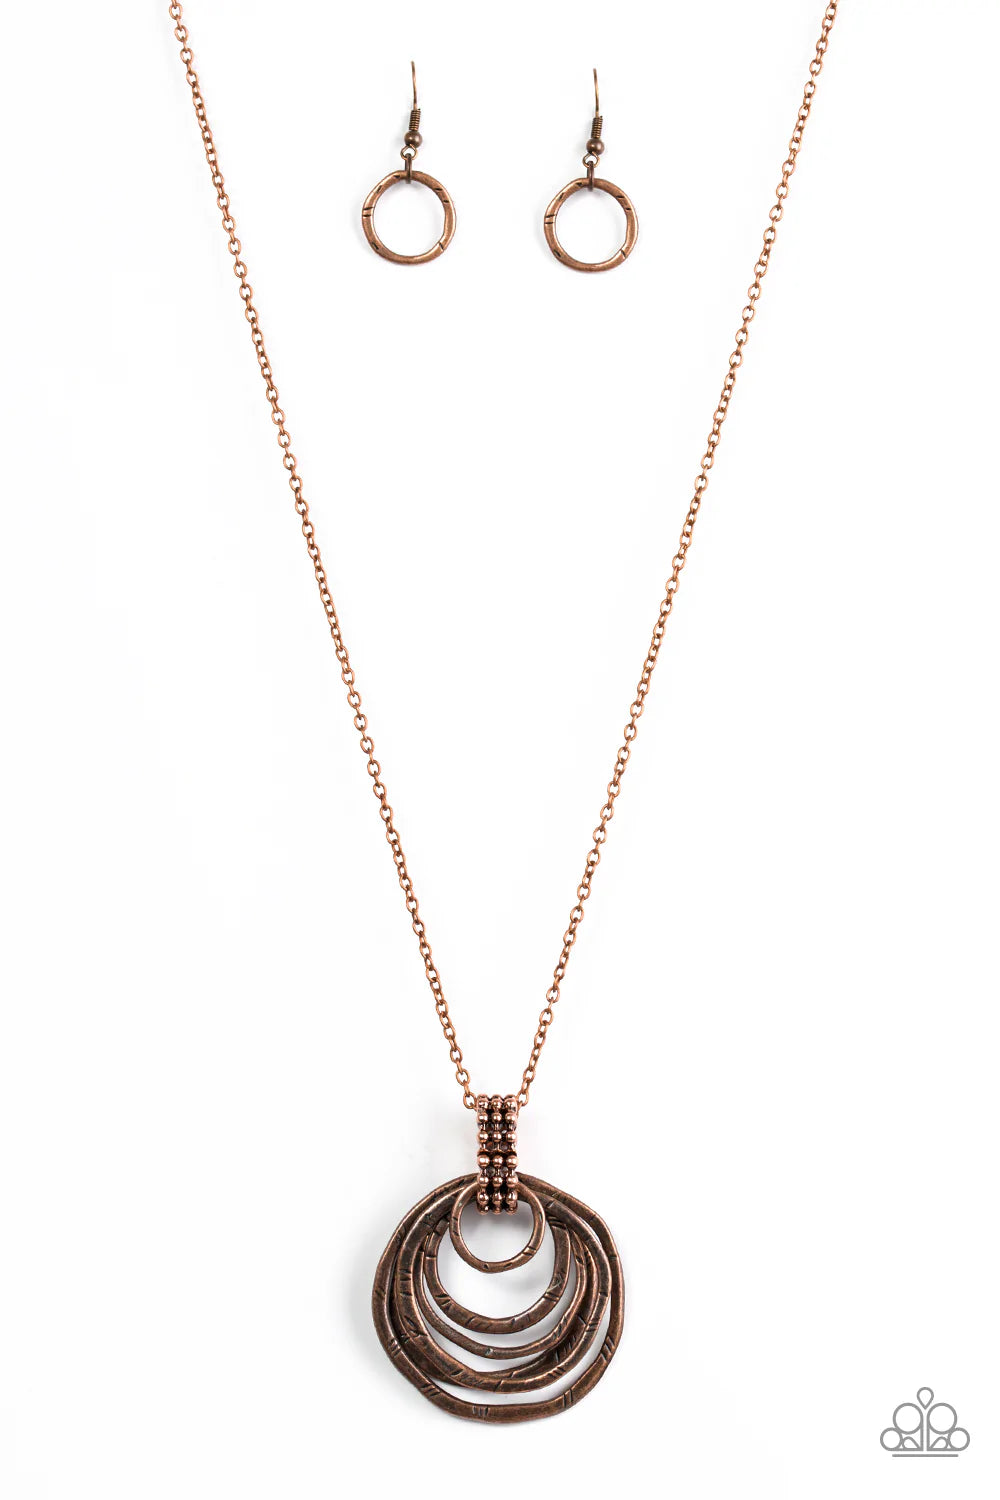 Paparazzi Necklace ~ Rippling Relic - Copper